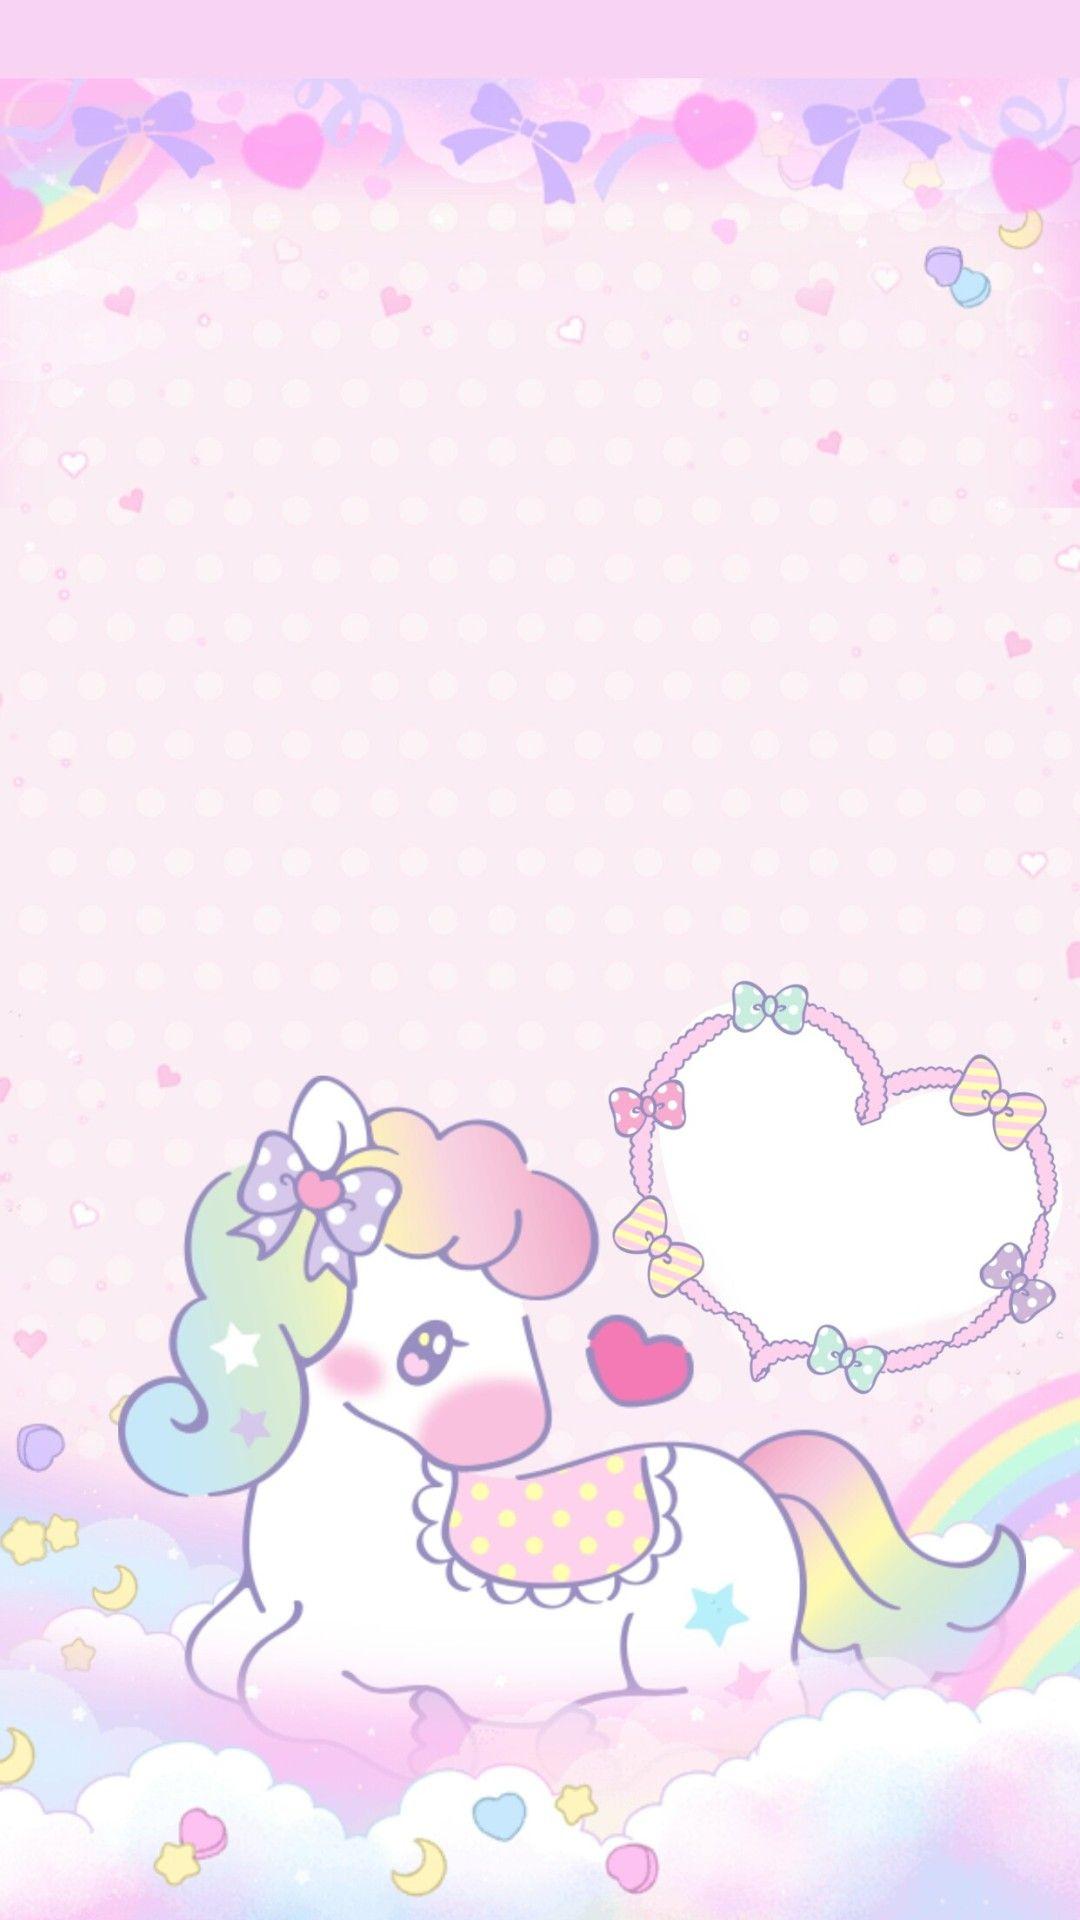 Cute Unicorn Pattern Seamless Horizontal in Pastel Color Kawaii Unicorn  Background Stock Vector  Illustration of color decoration 145689950